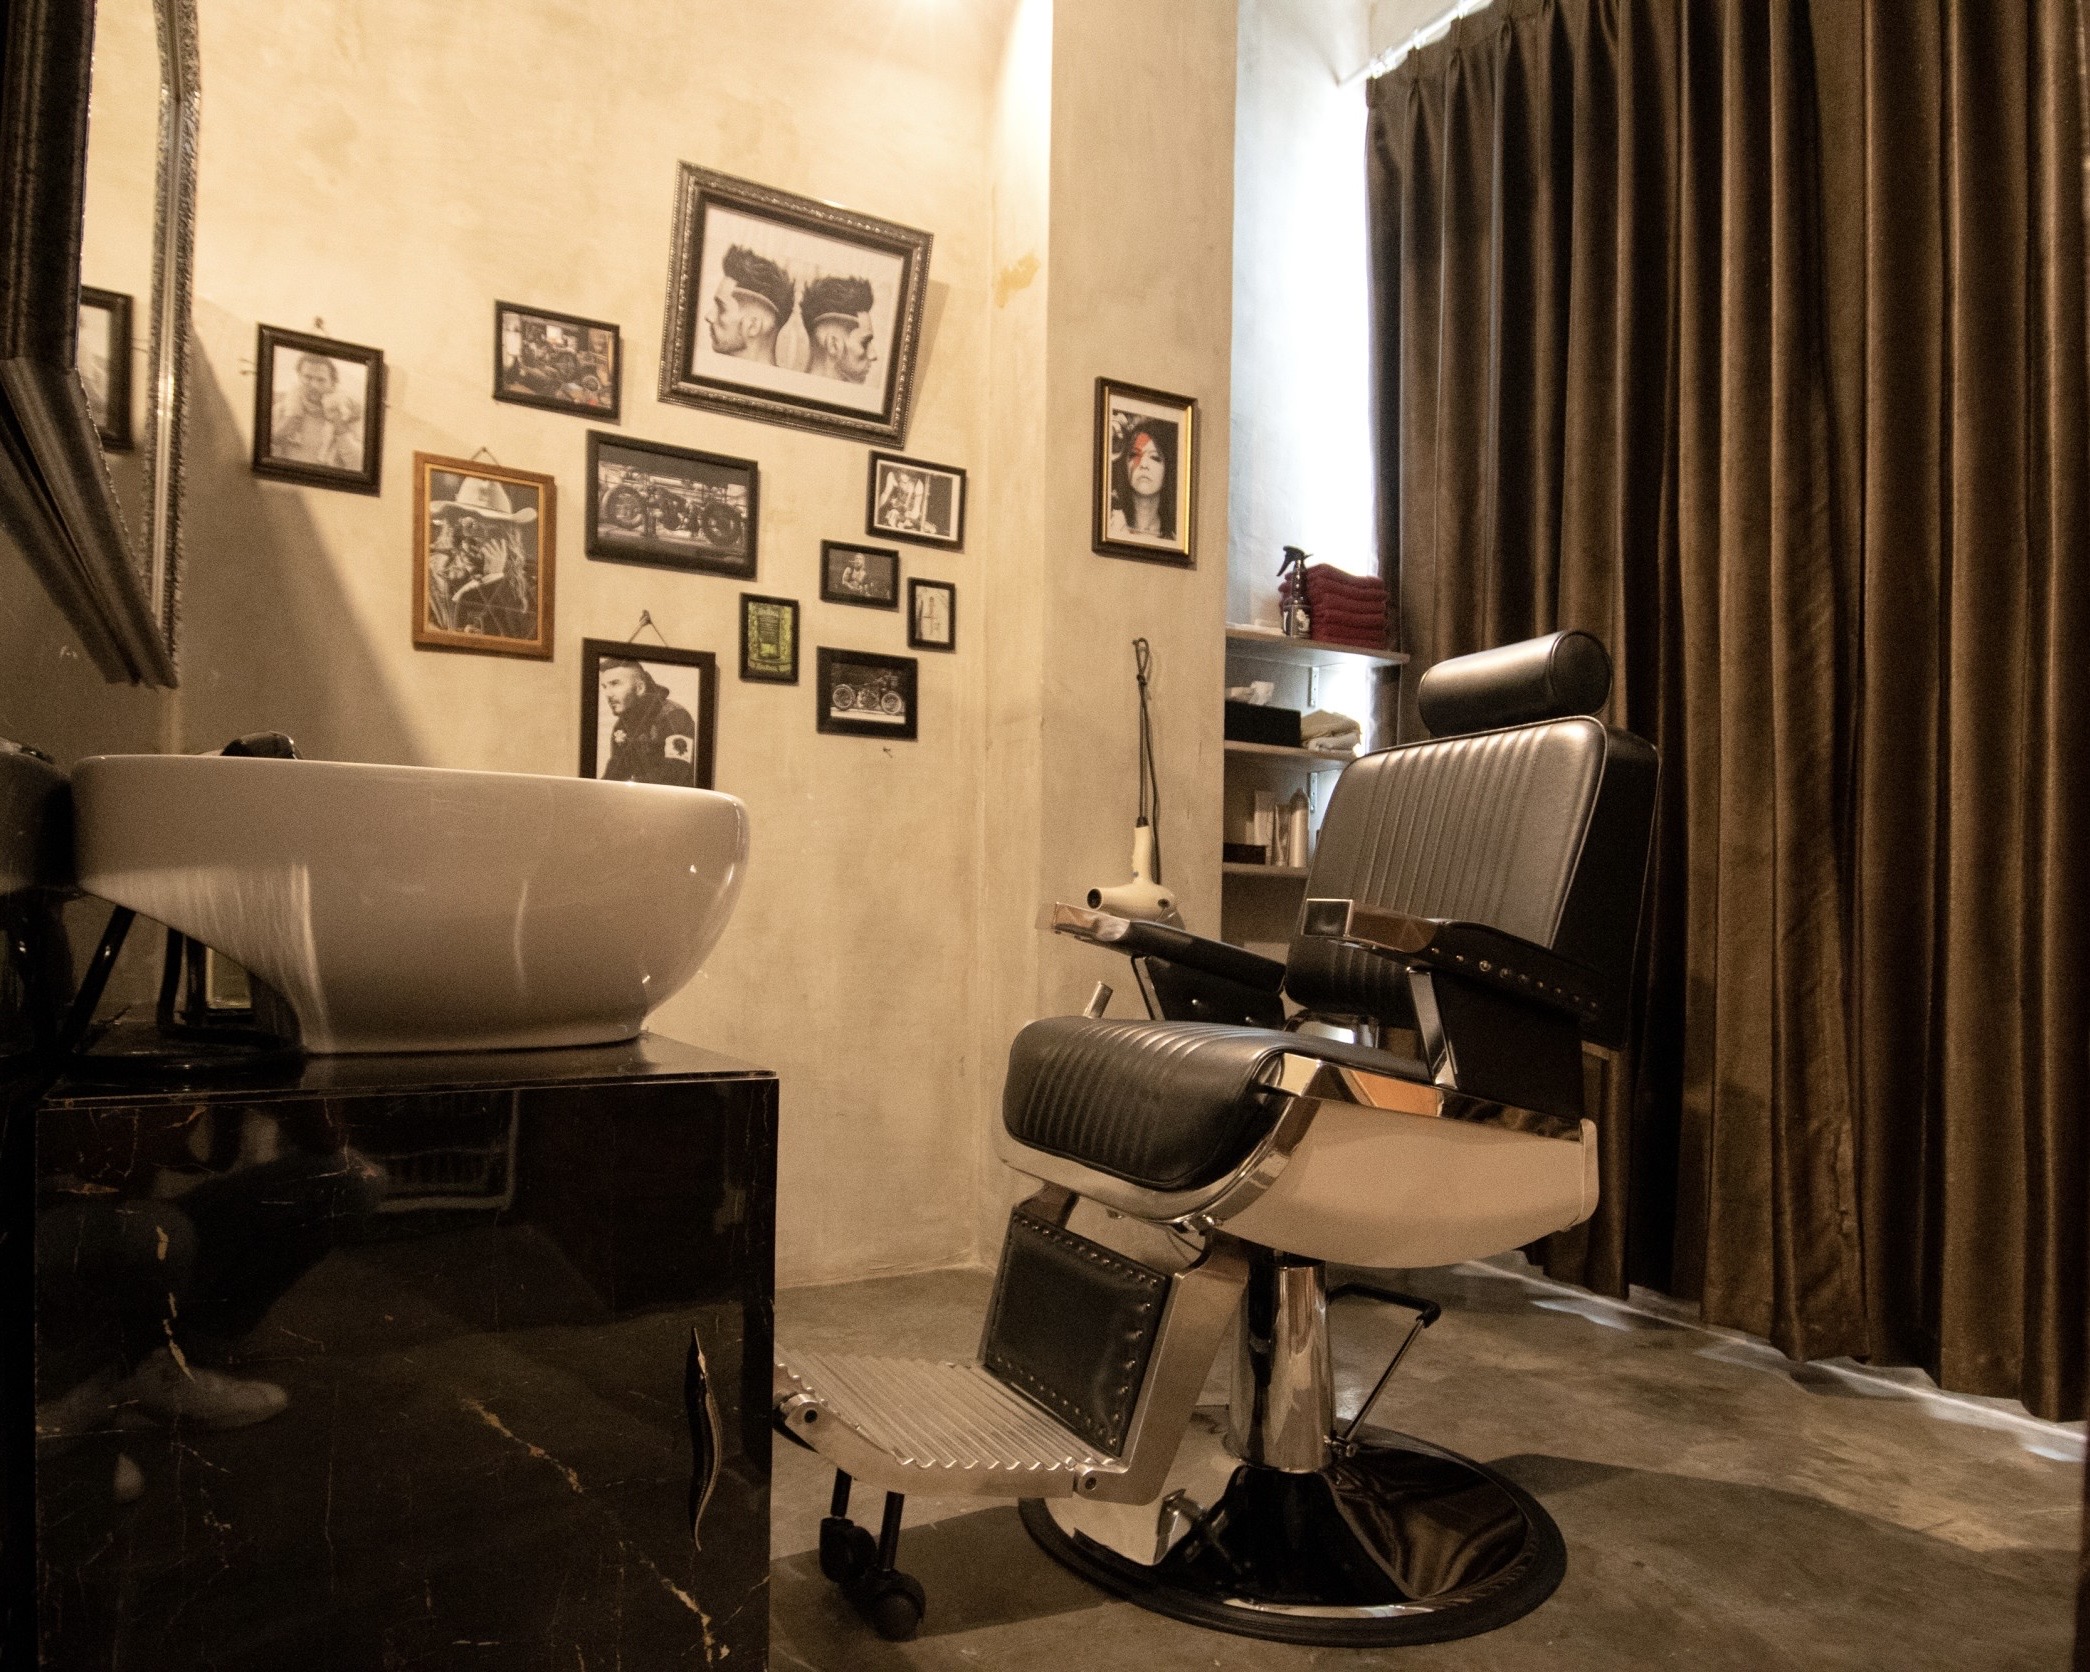 Lond by Cielsowal Barber 